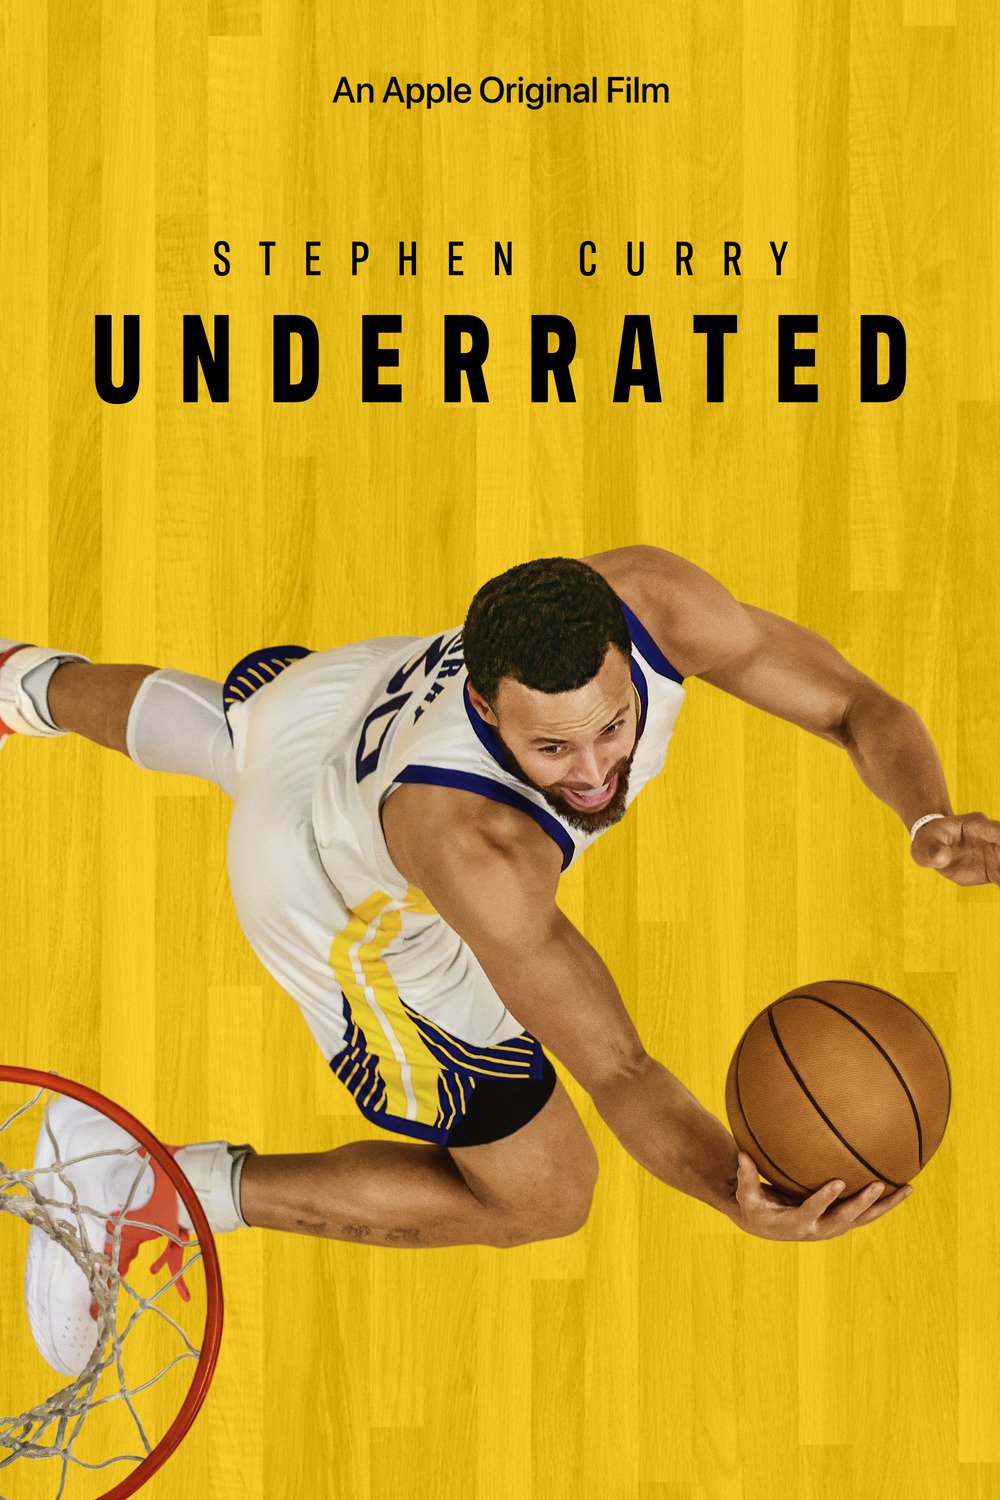 Poster of the movie Stephen Curry: Underrated